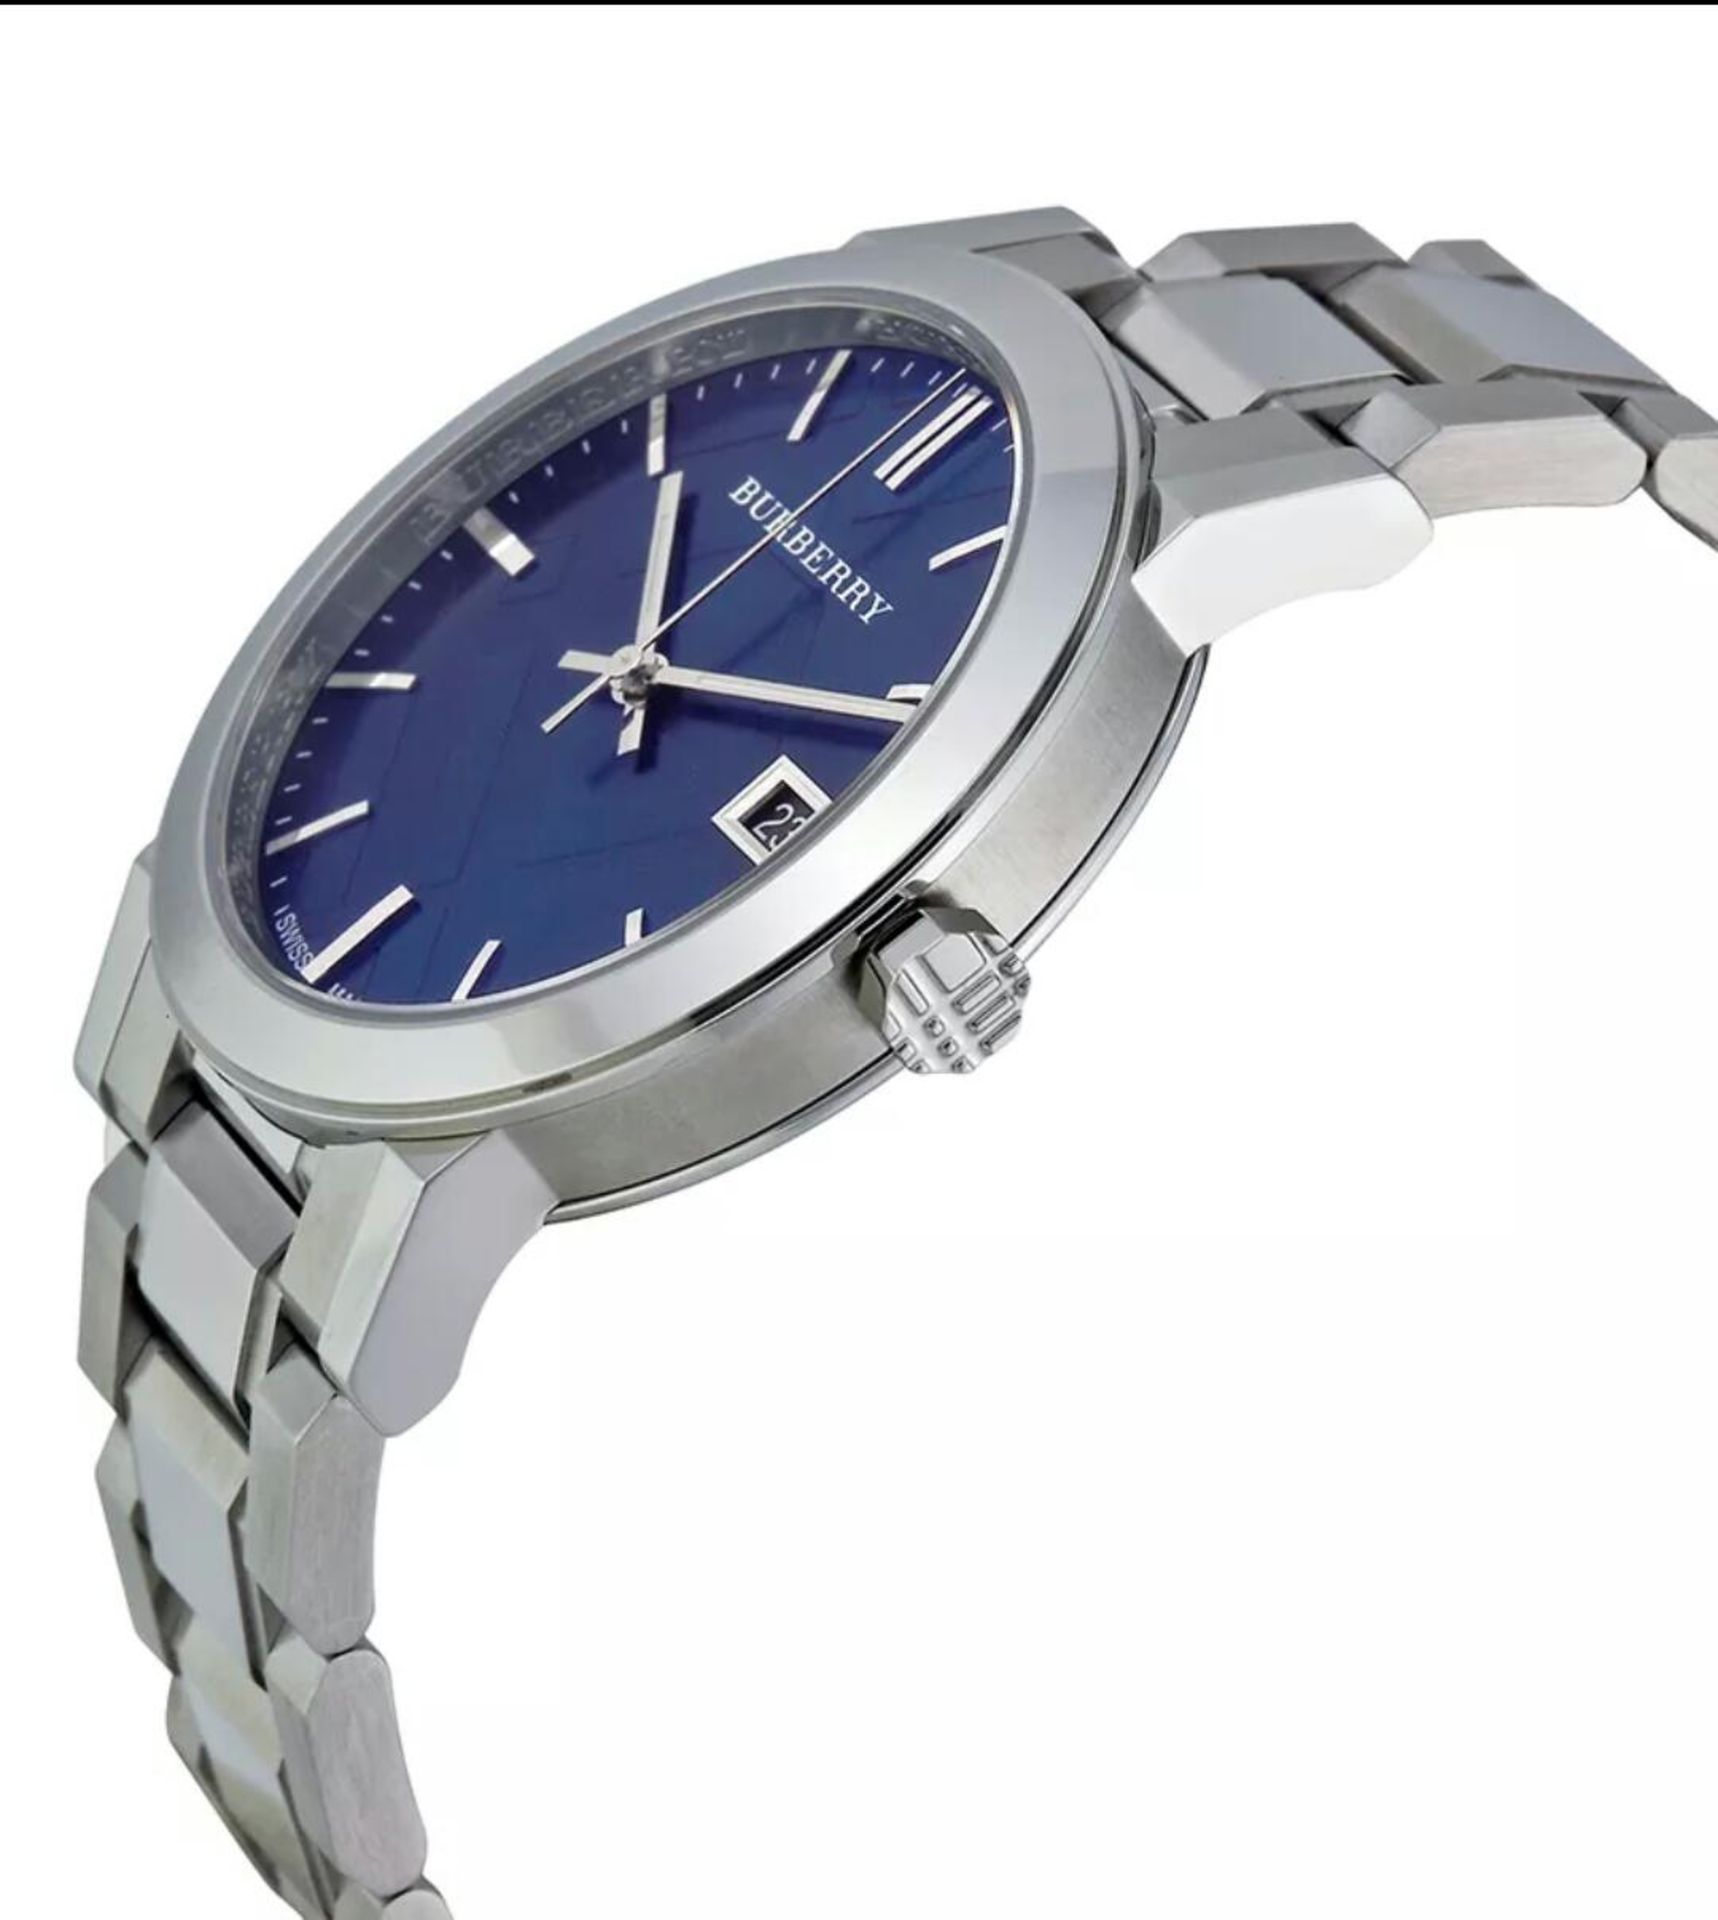 BRAND NEW BURBERRY BU9031, GENTS LARGE CHECK STAMPED , BLUE FACE DESIGNER WATCH - RRP £499, FREE P&P - Image 2 of 2